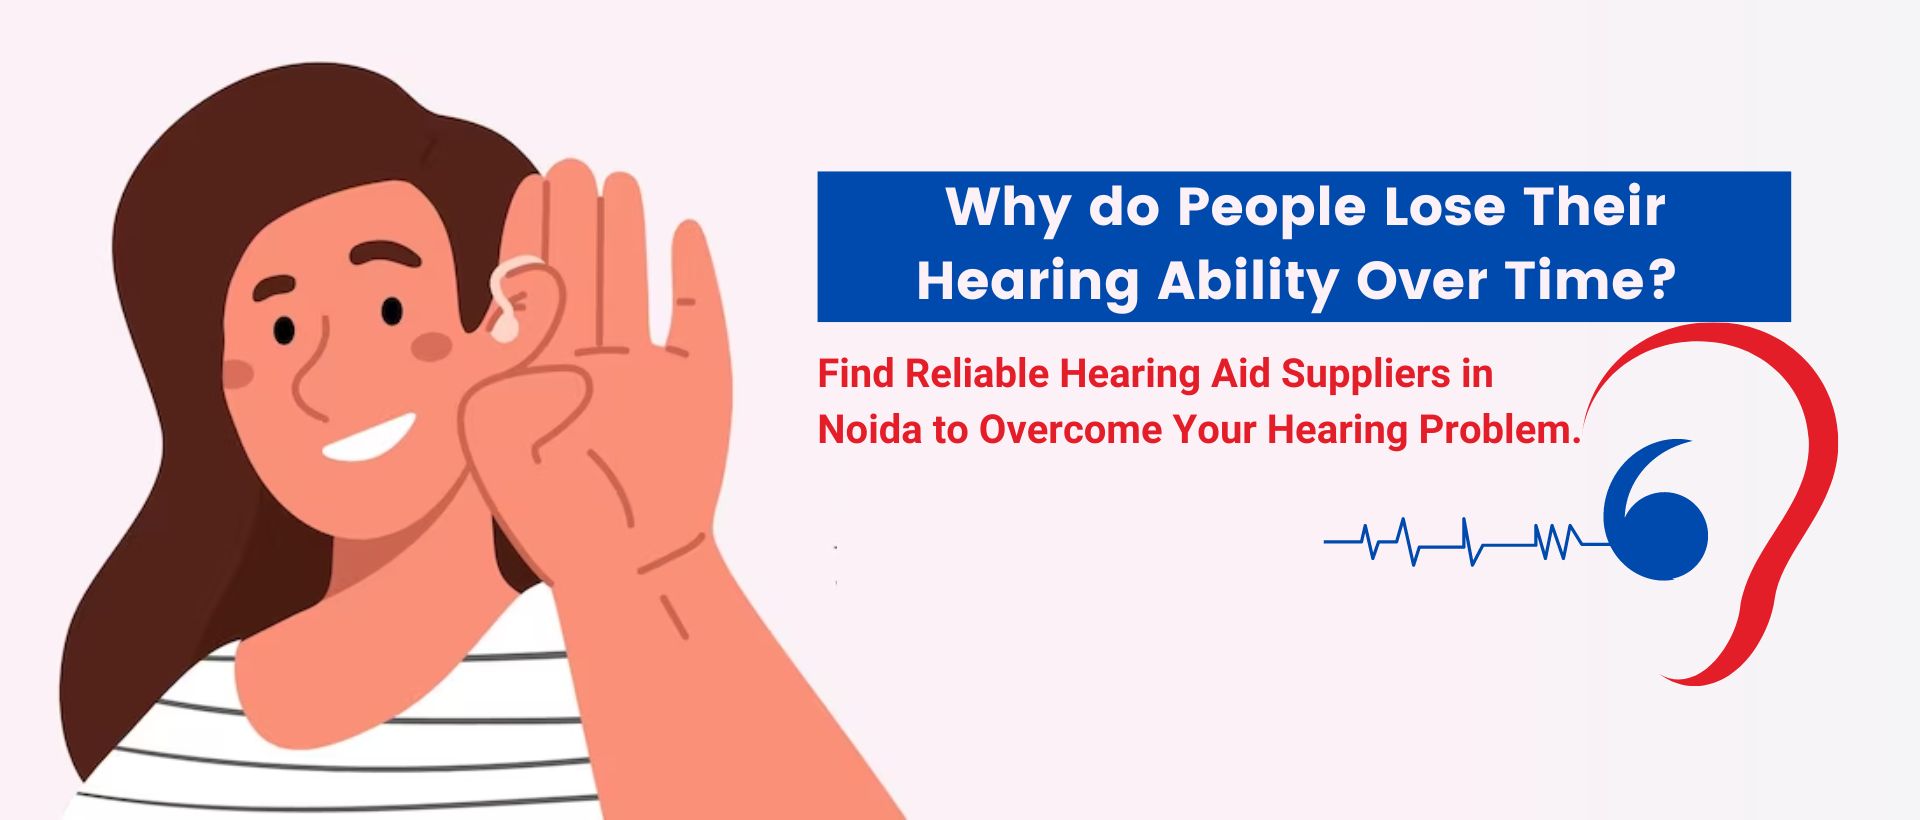 Find reliable hearing aid suppliers in noida to overcome your hearing problem